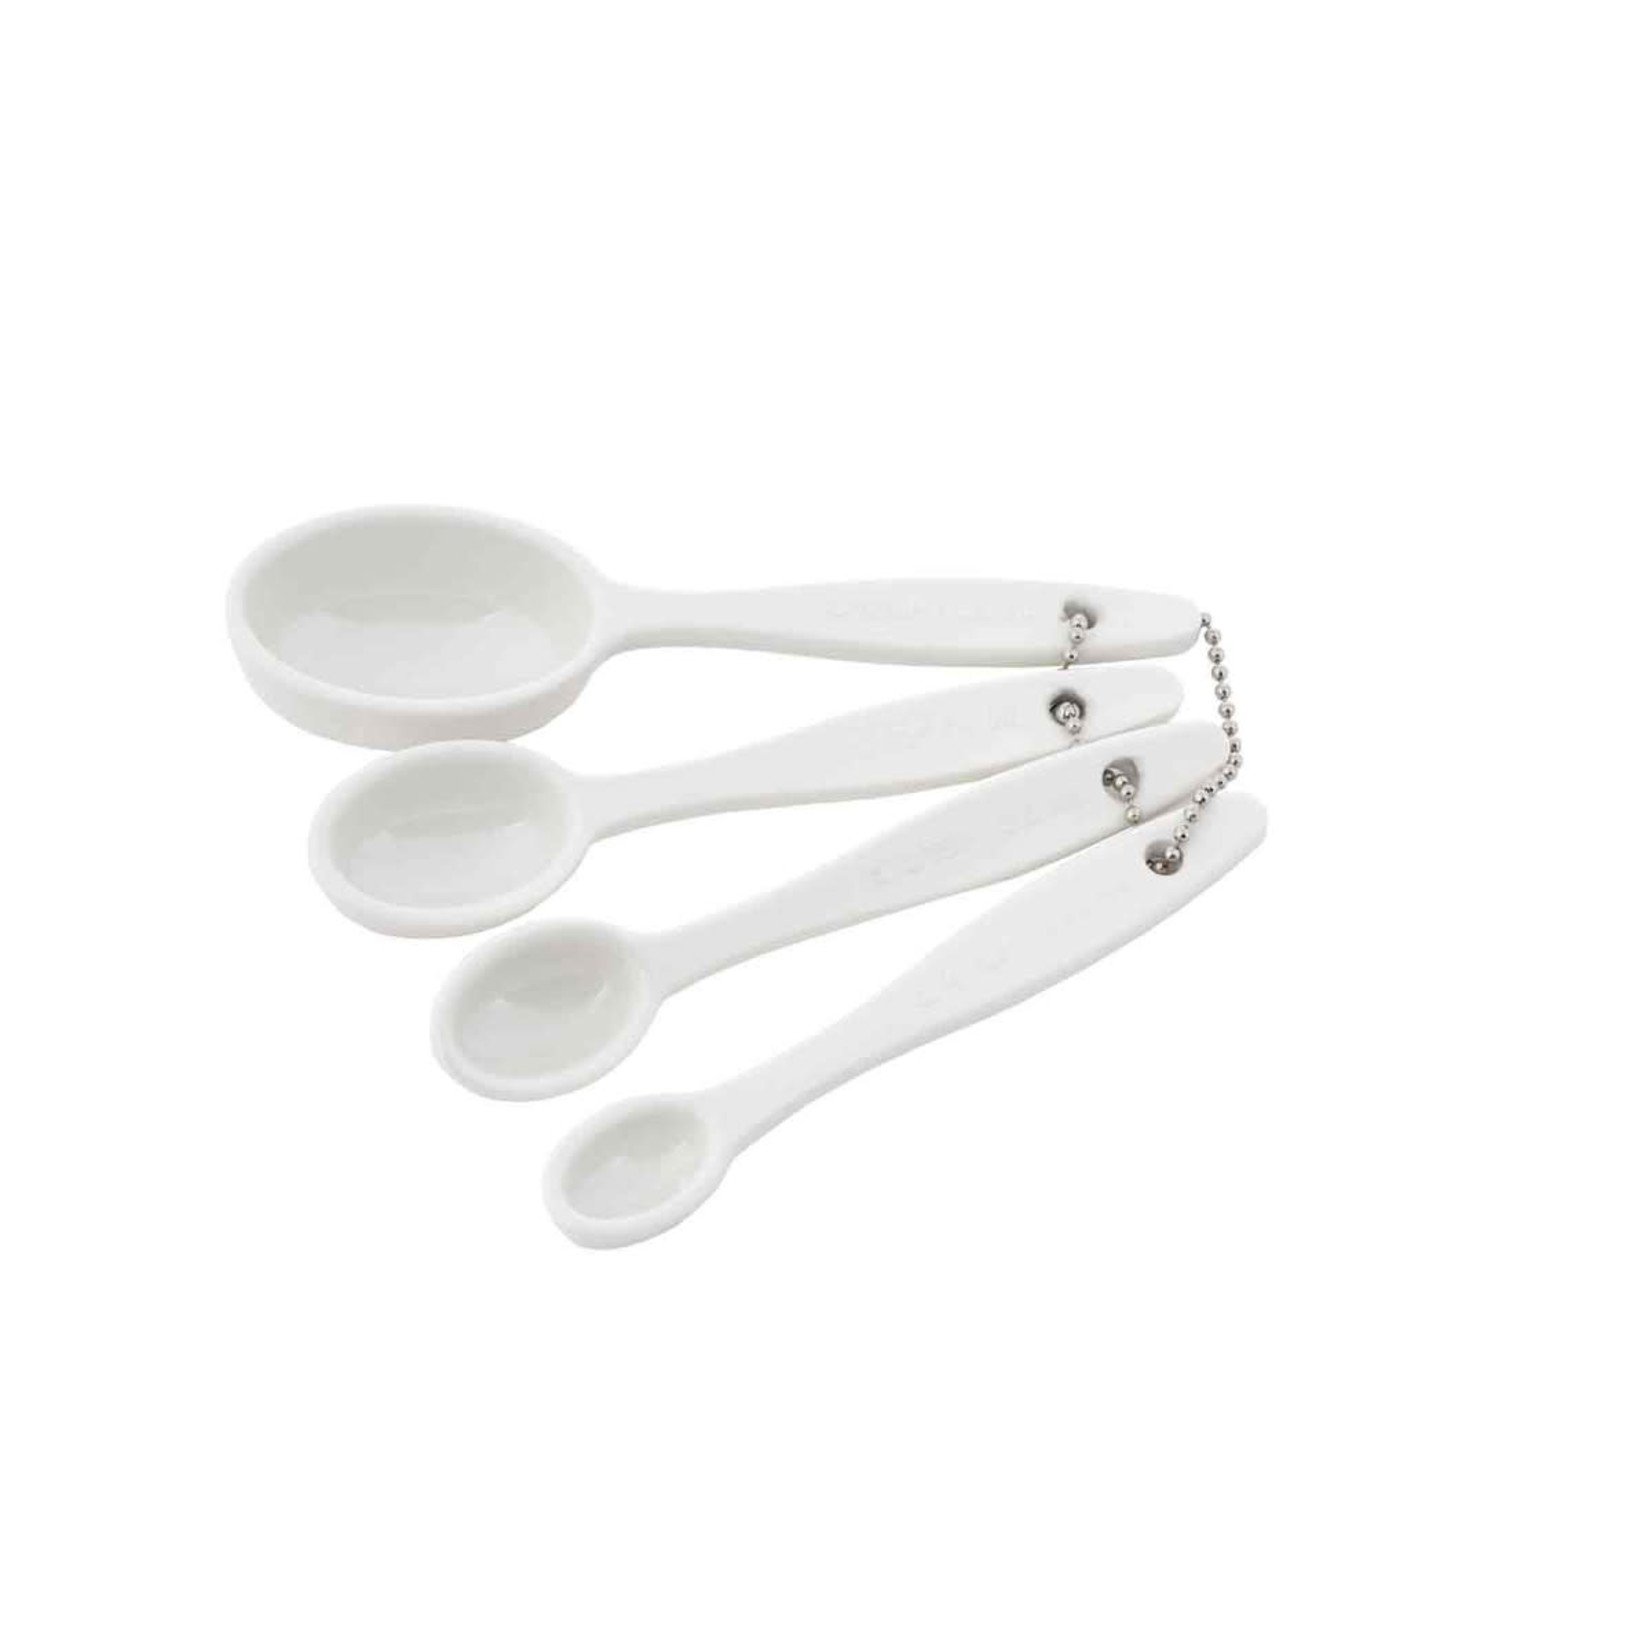 Crofthouse Collection(TM) Measuring Spoons, Set of 4, Includes: 1